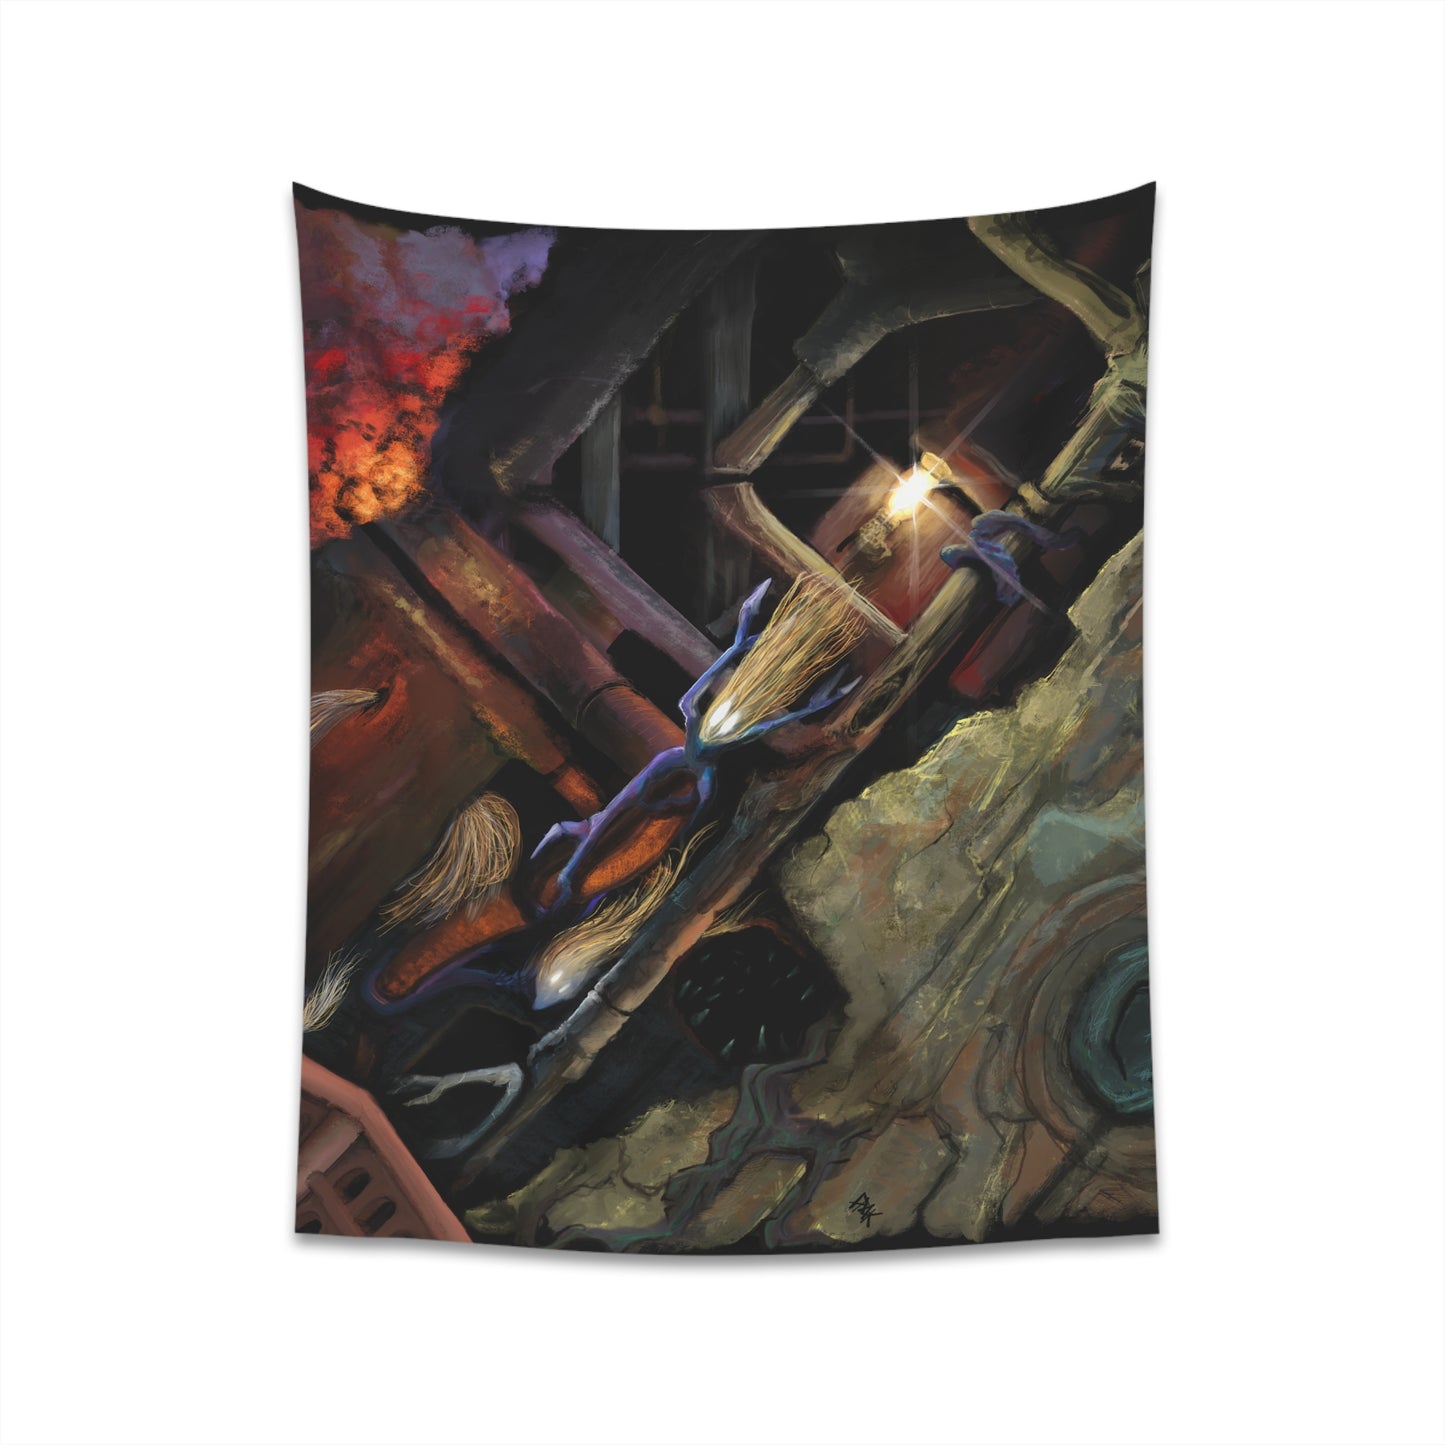 What Dwells in the Pipes Printed Wall Tapestry